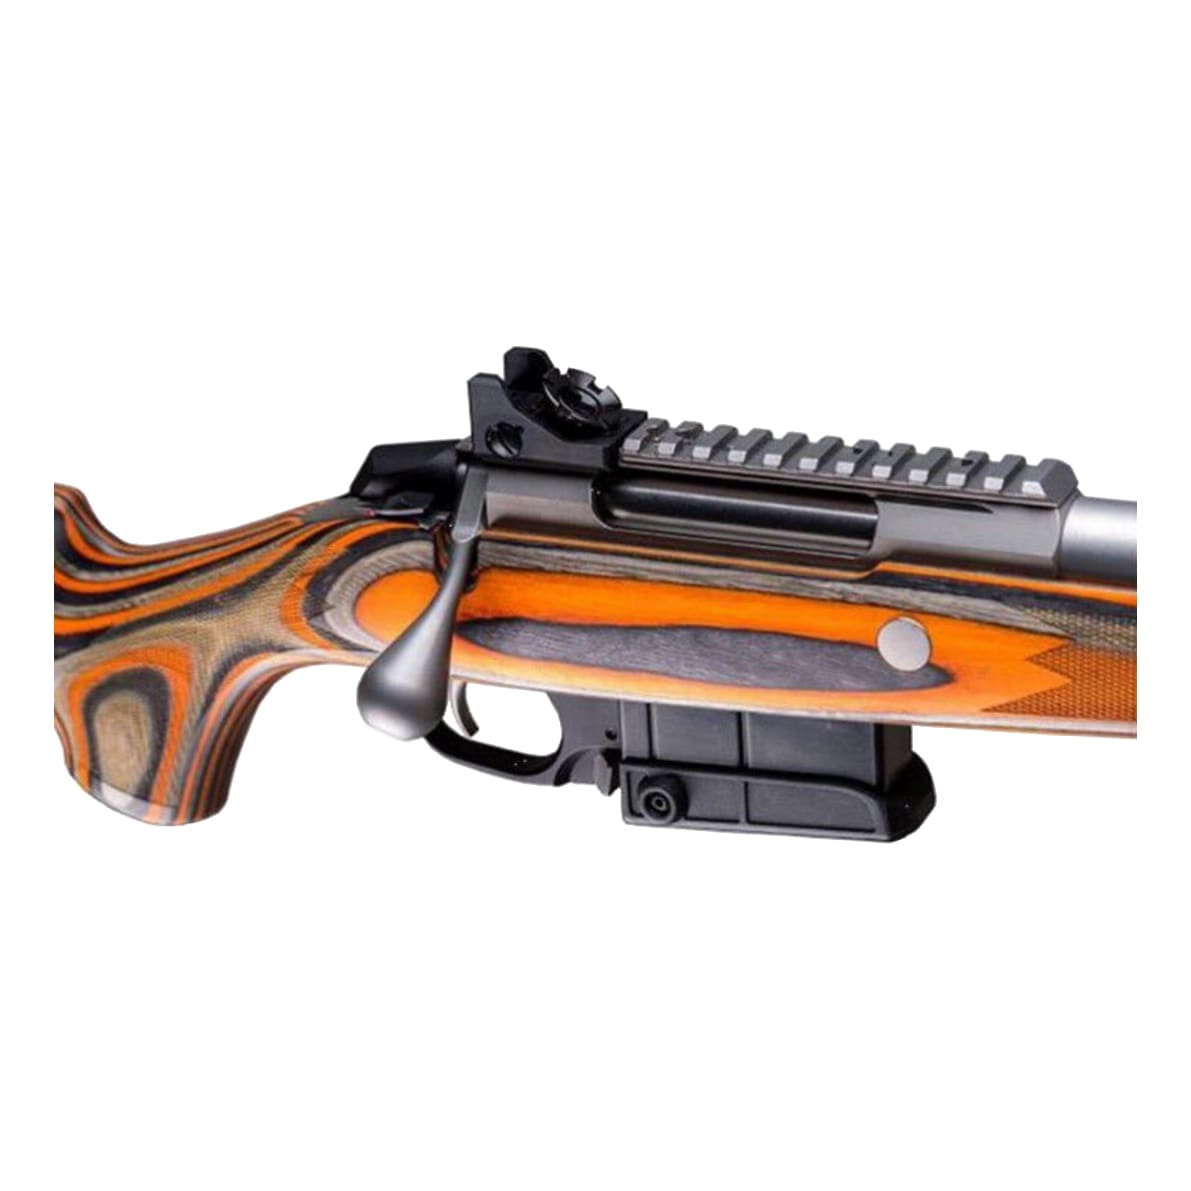 Tikka T3x Arctic Stainless Bolt-Action Rifle - Receiver Detail